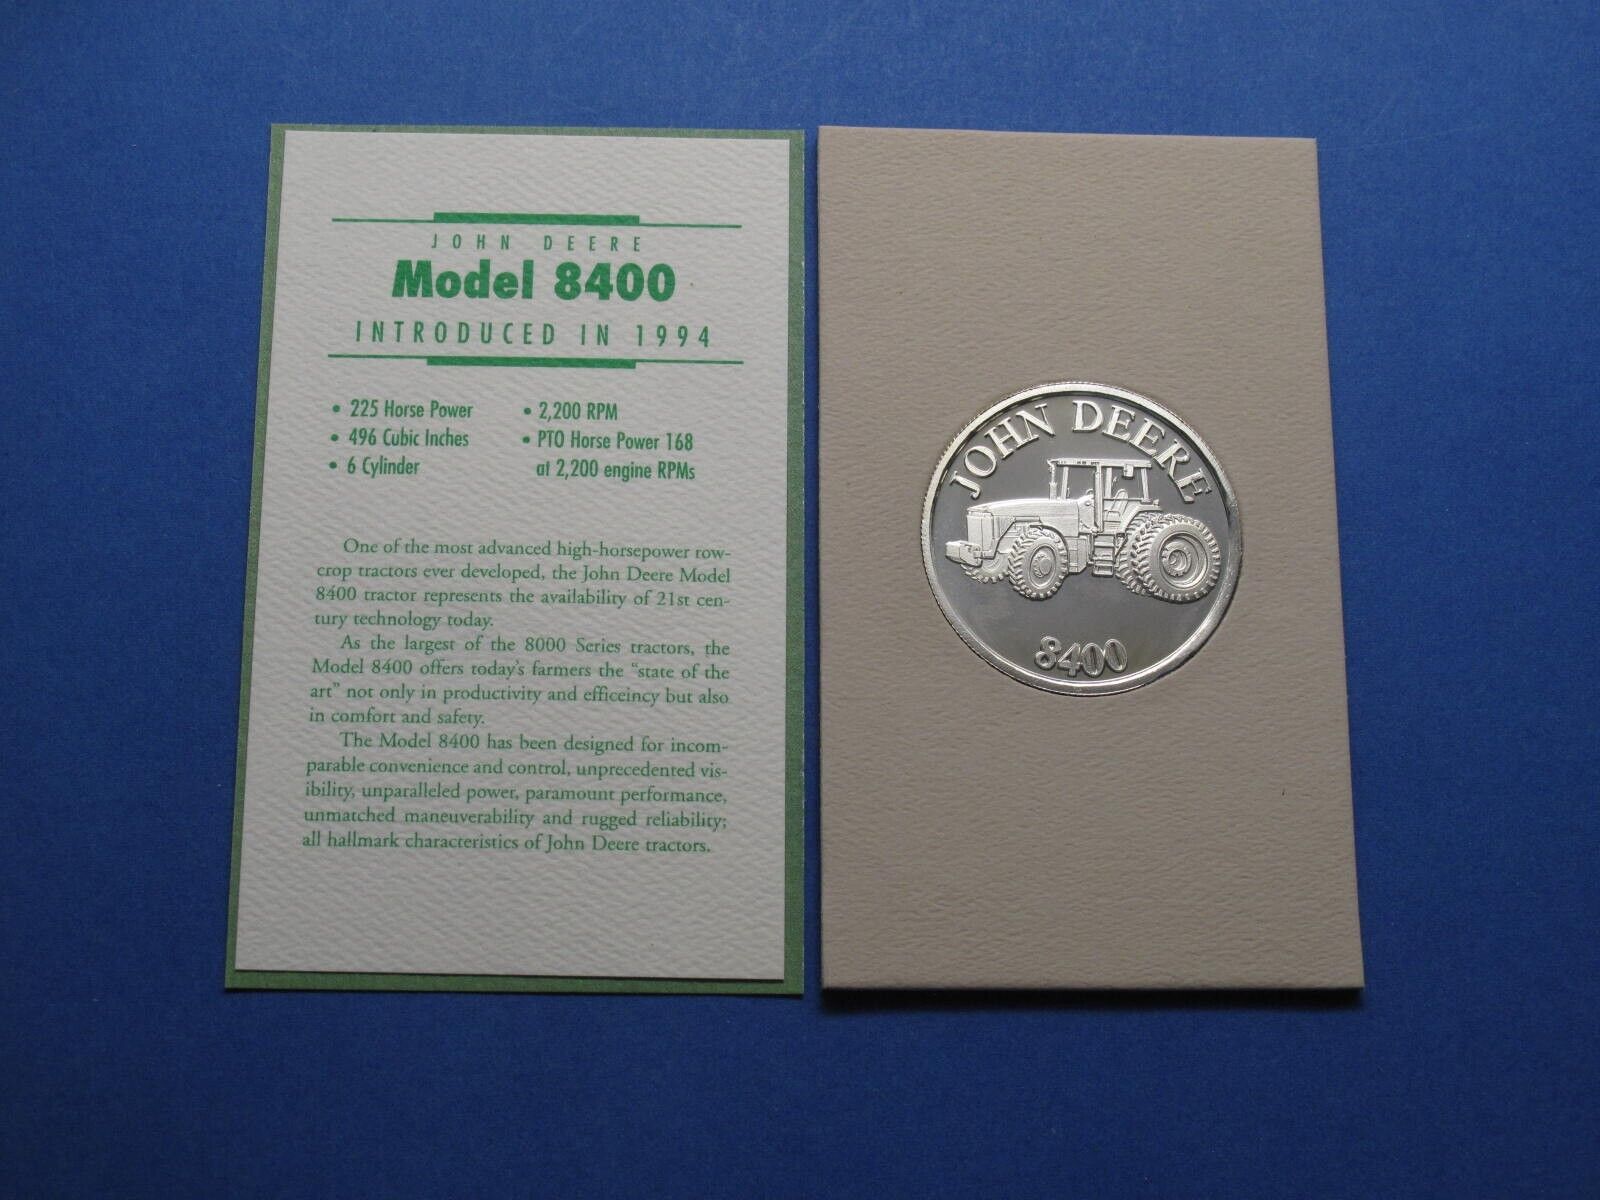 John Deere 1994 Model 8400 Tractor Silver Round in Case with Story 1 oz 999 Fine